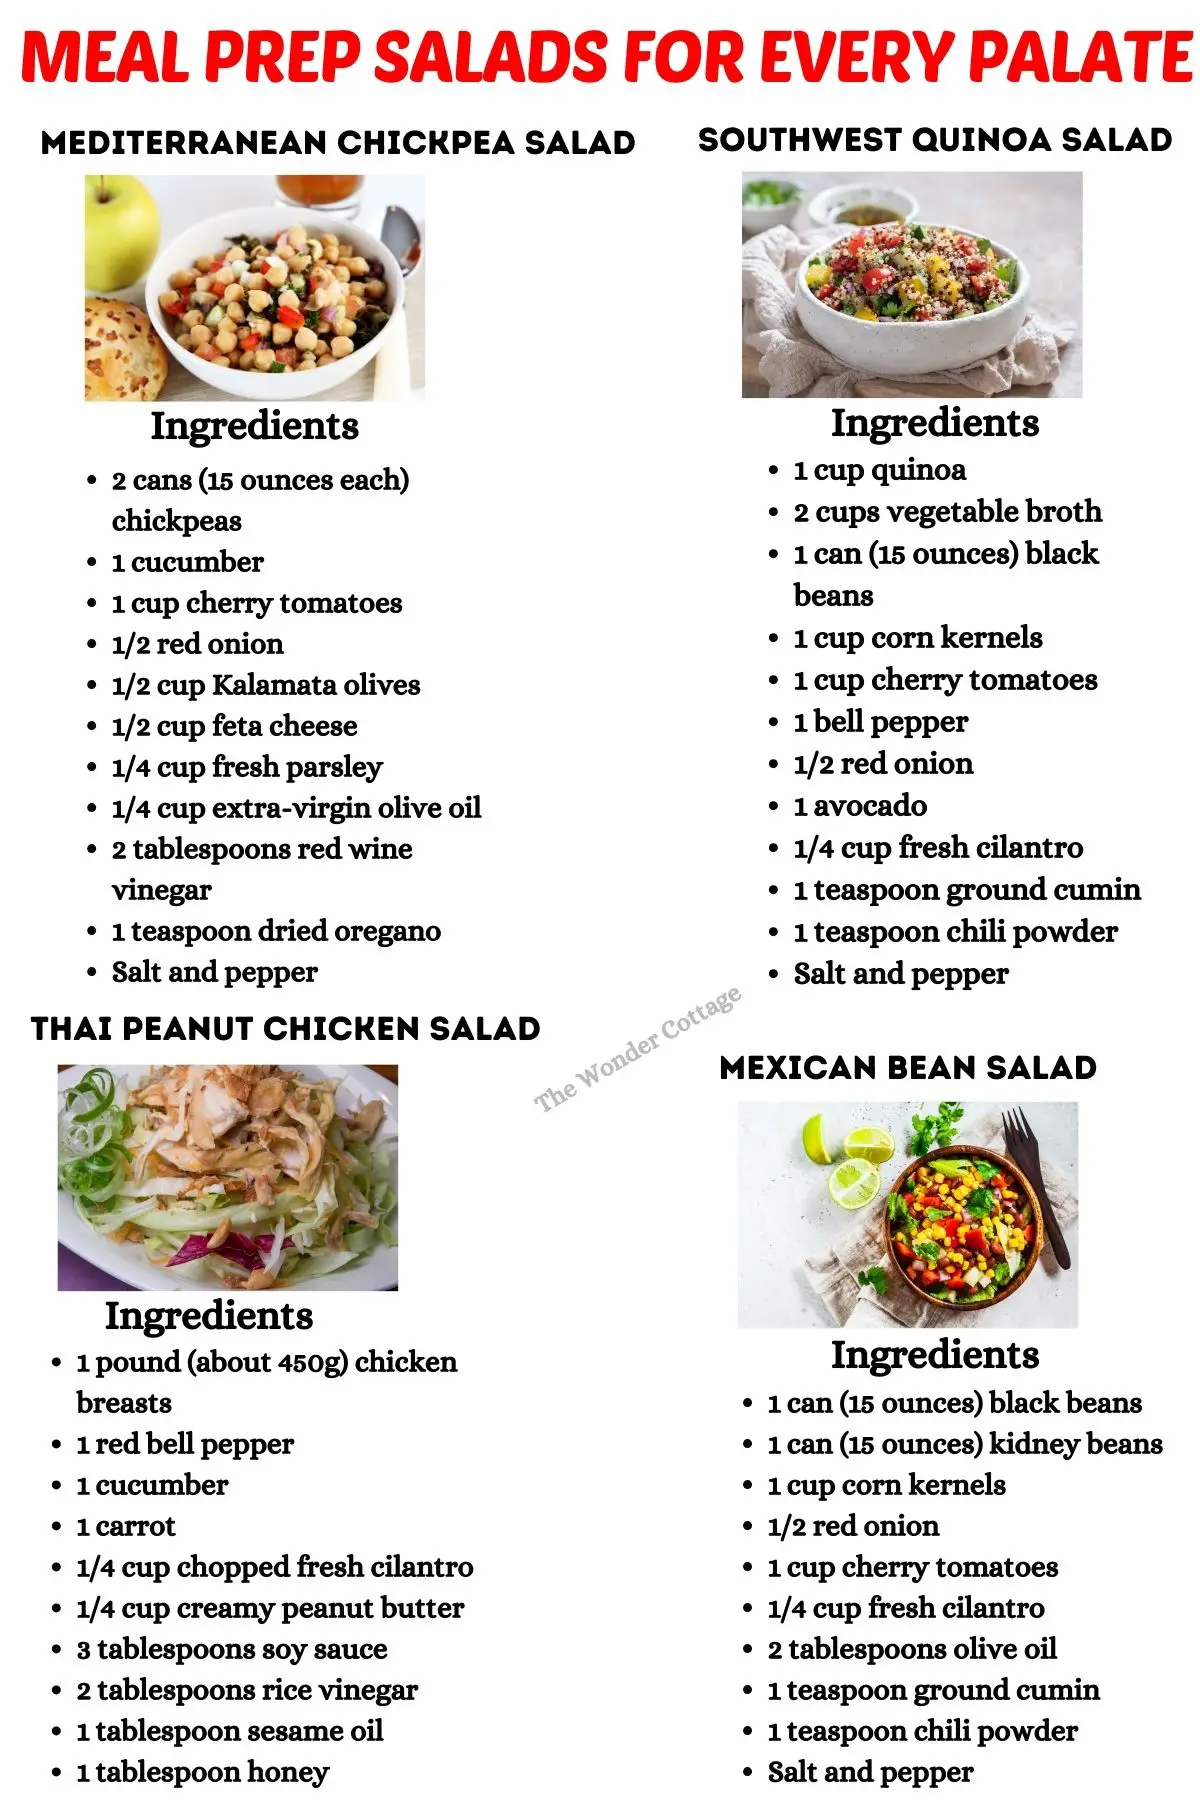  Meal Prep Salads for Every Palate